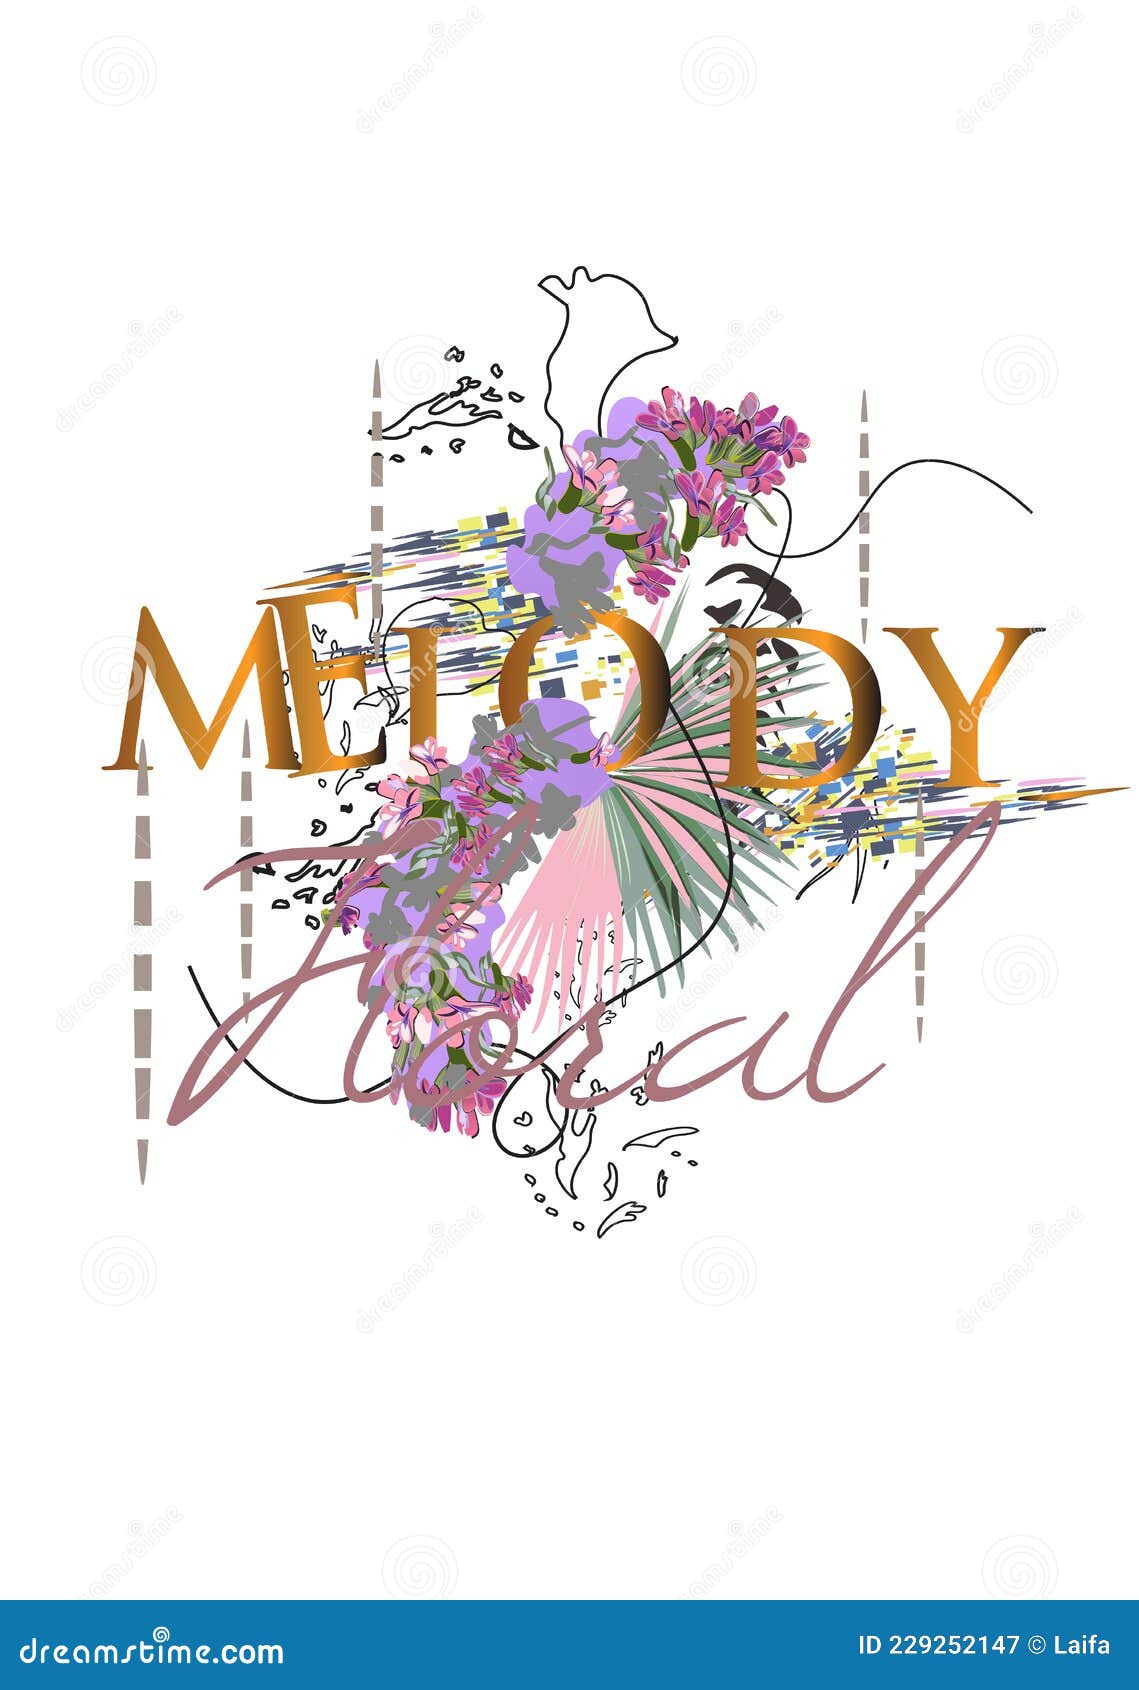 Design with Tropical Melody of Heart Slogan. Background with Palm Leaves  and Flowers Stock Vector - Illustration of motivational, abstract: 229252147